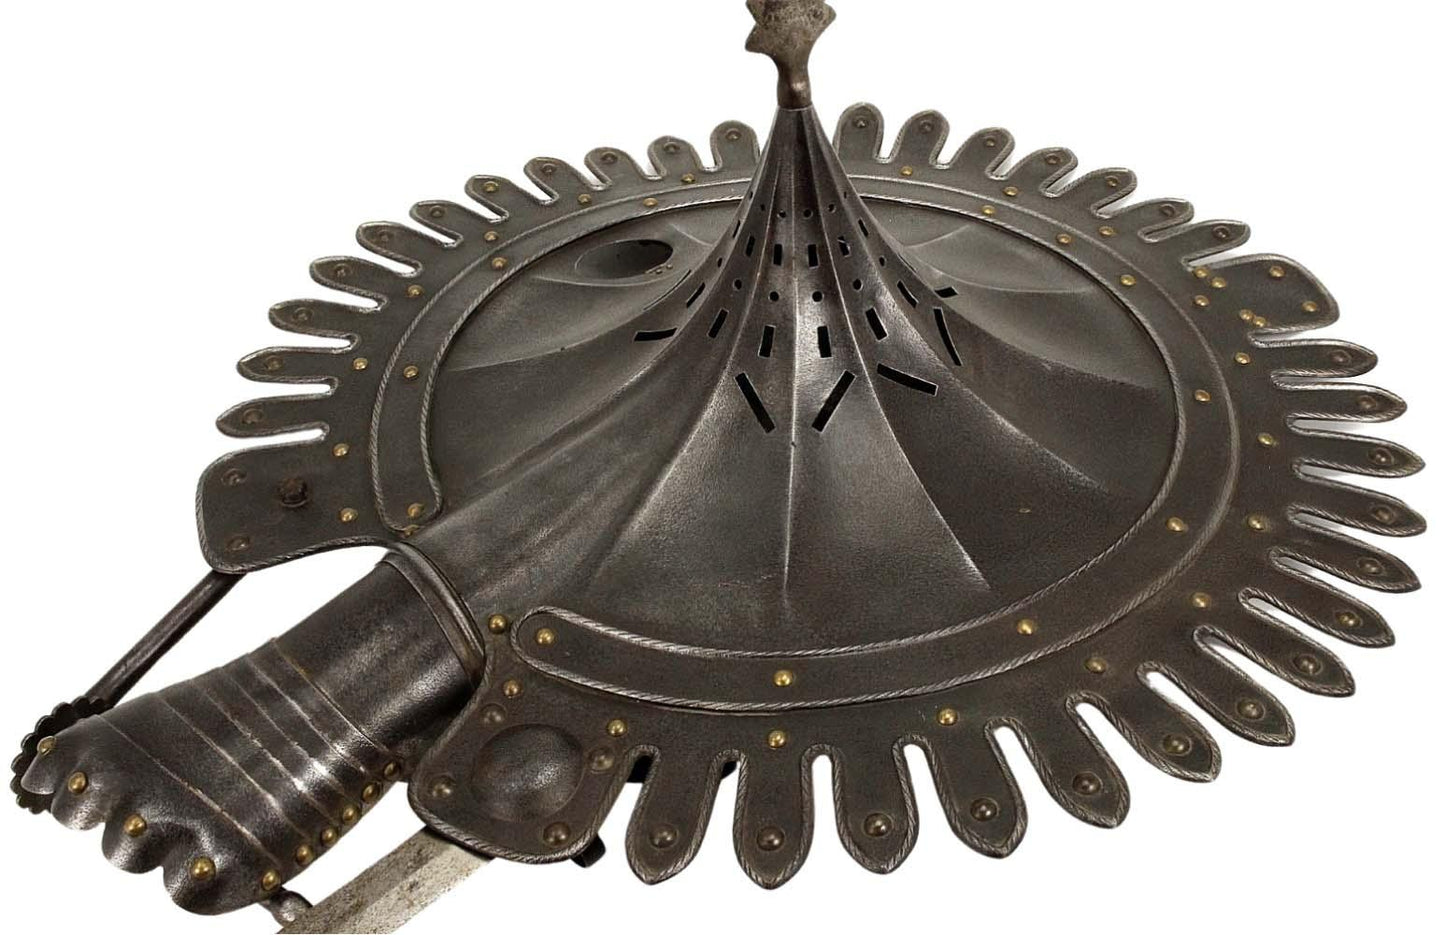 Spectacular German Bracciajula or Lantern Shield With a Gauntlet & Strong Retractable Sword Blade. Includes The Eye Window For Peaking Through